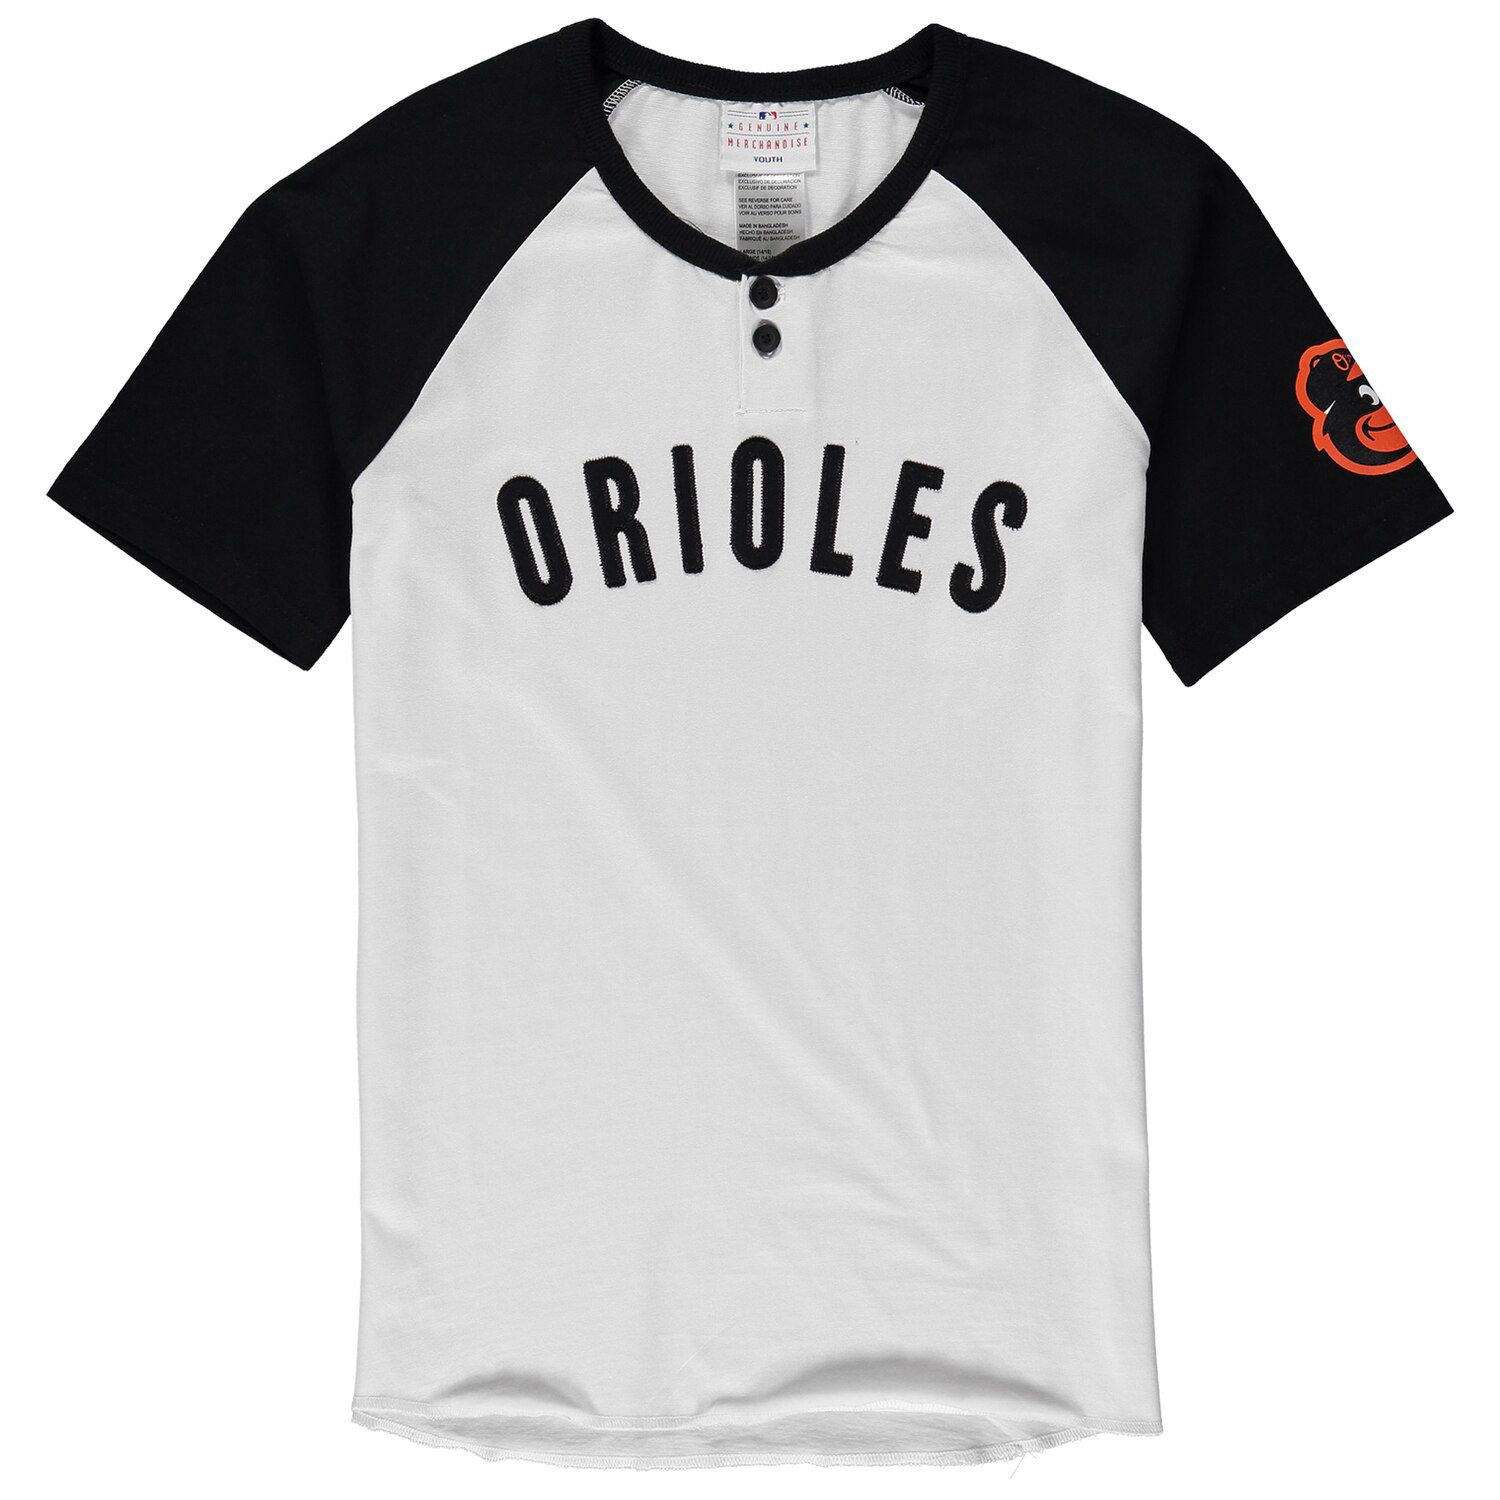 baltimore orioles youth jersey